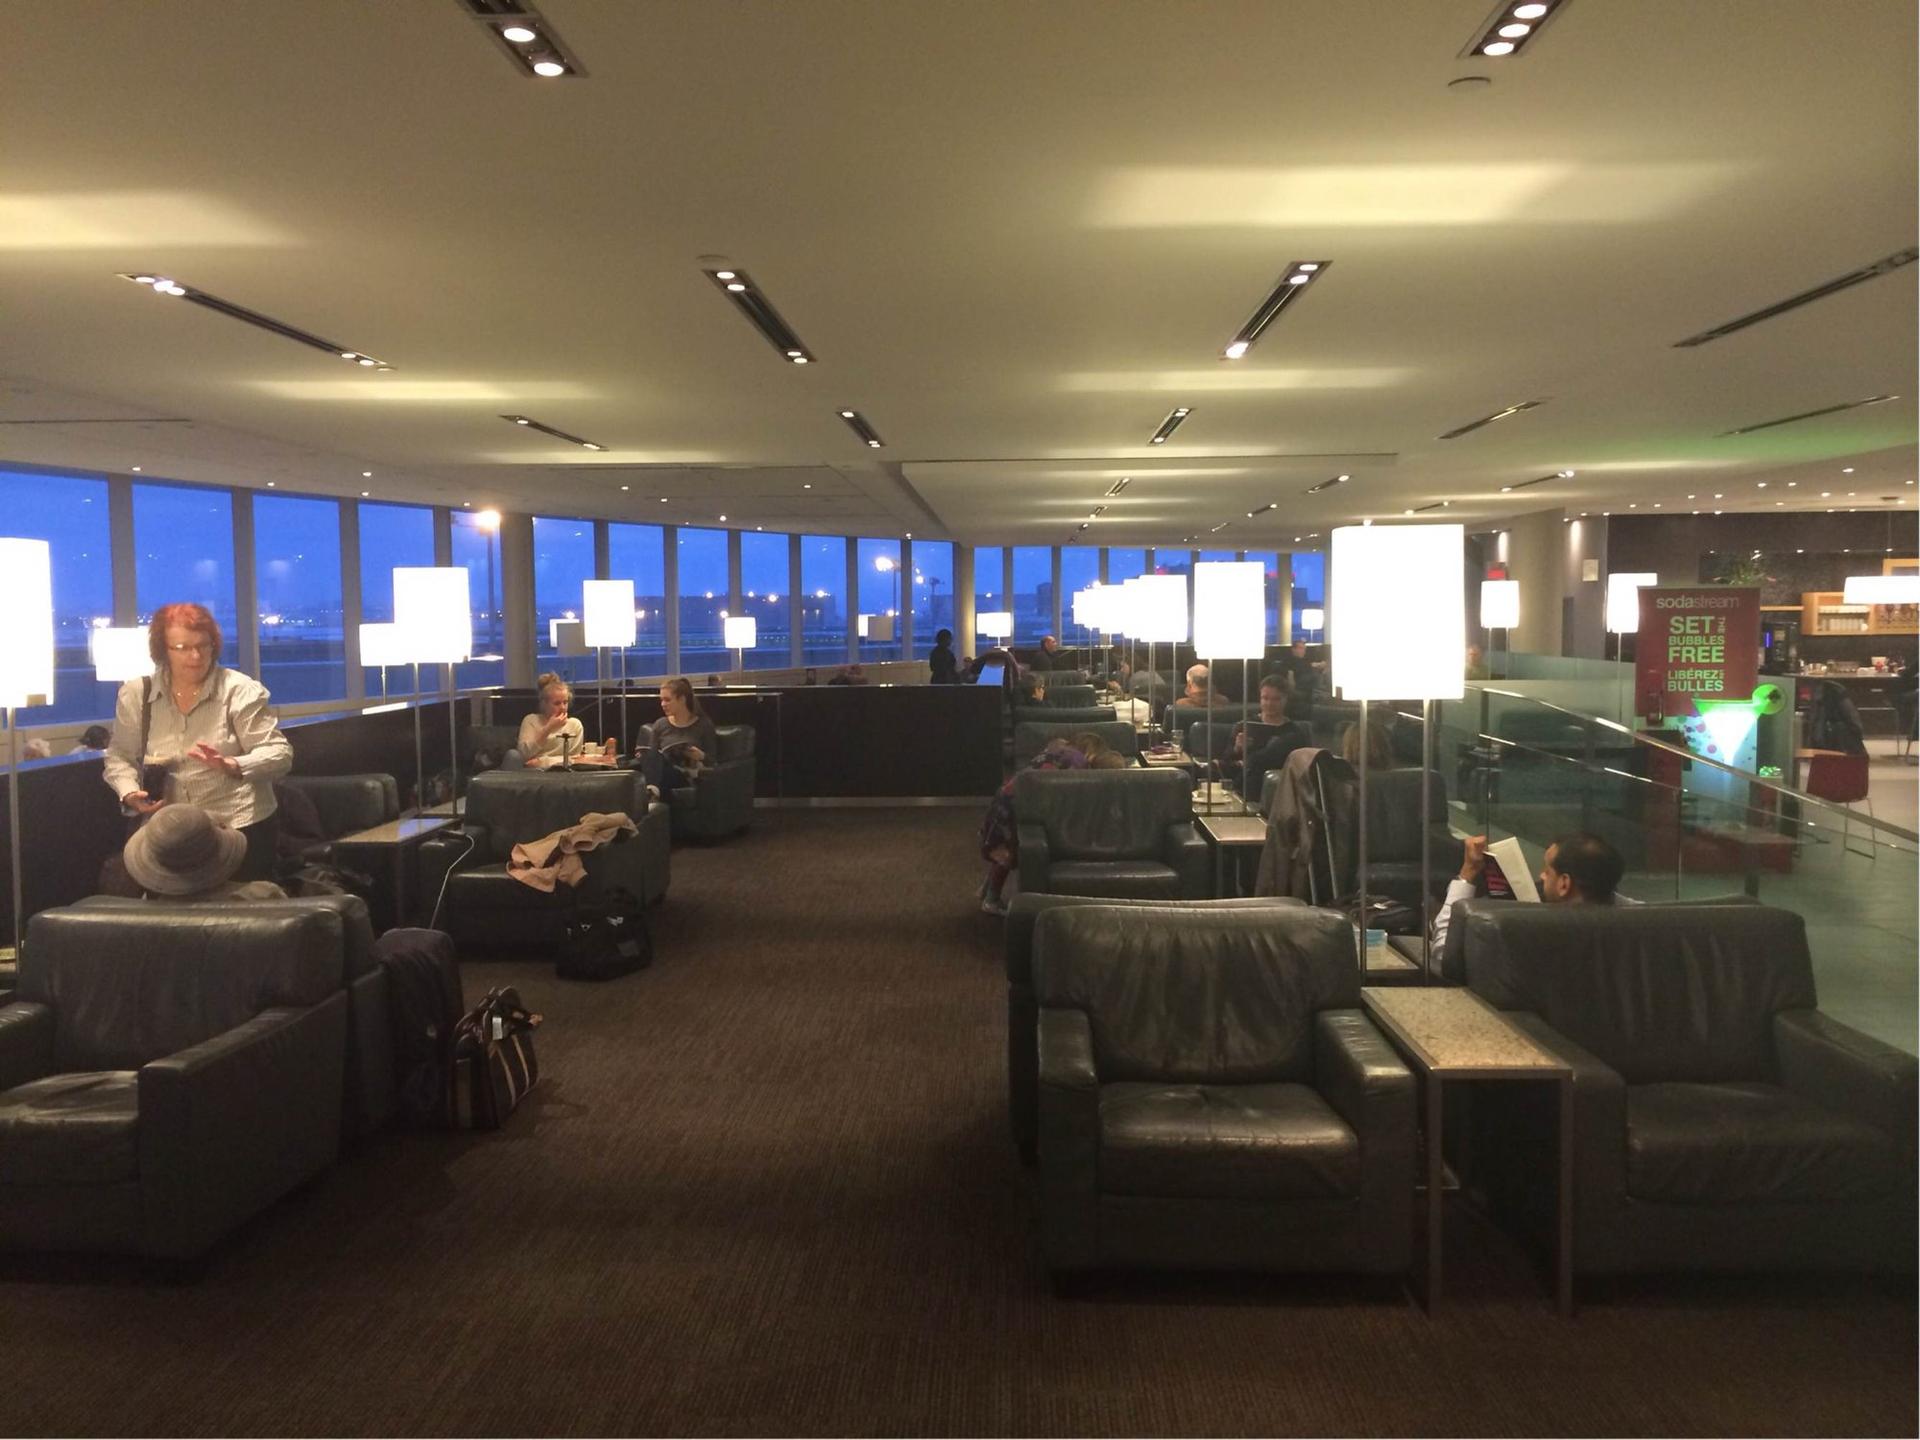 Air Canada Maple Leaf Lounge image 8 of 21